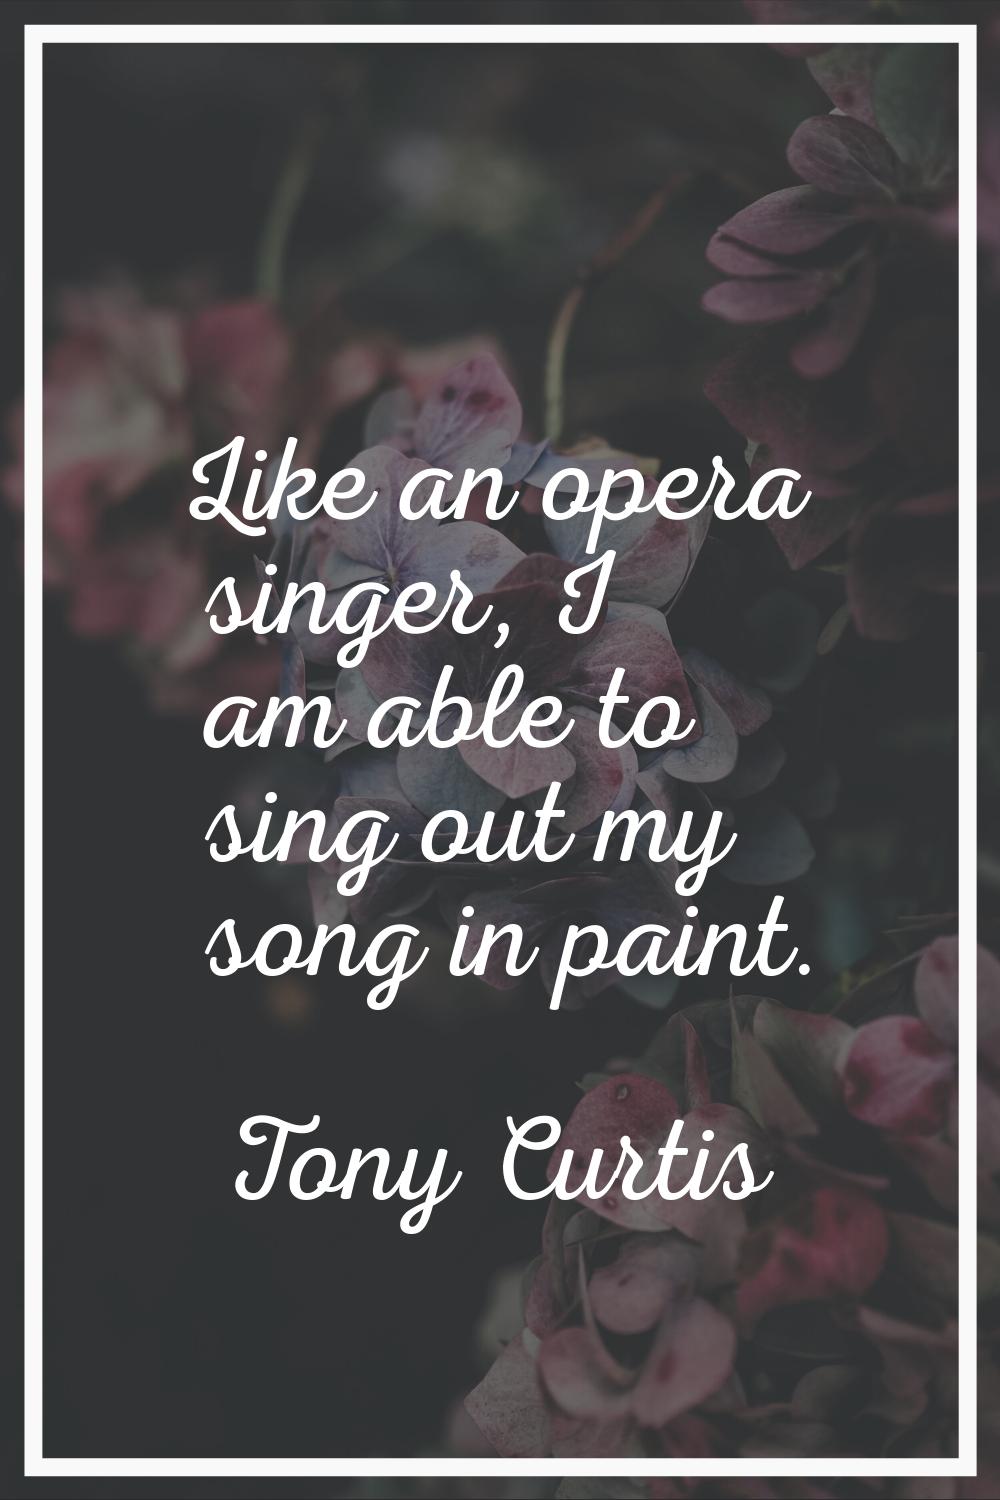 Like an opera singer, I am able to sing out my song in paint.